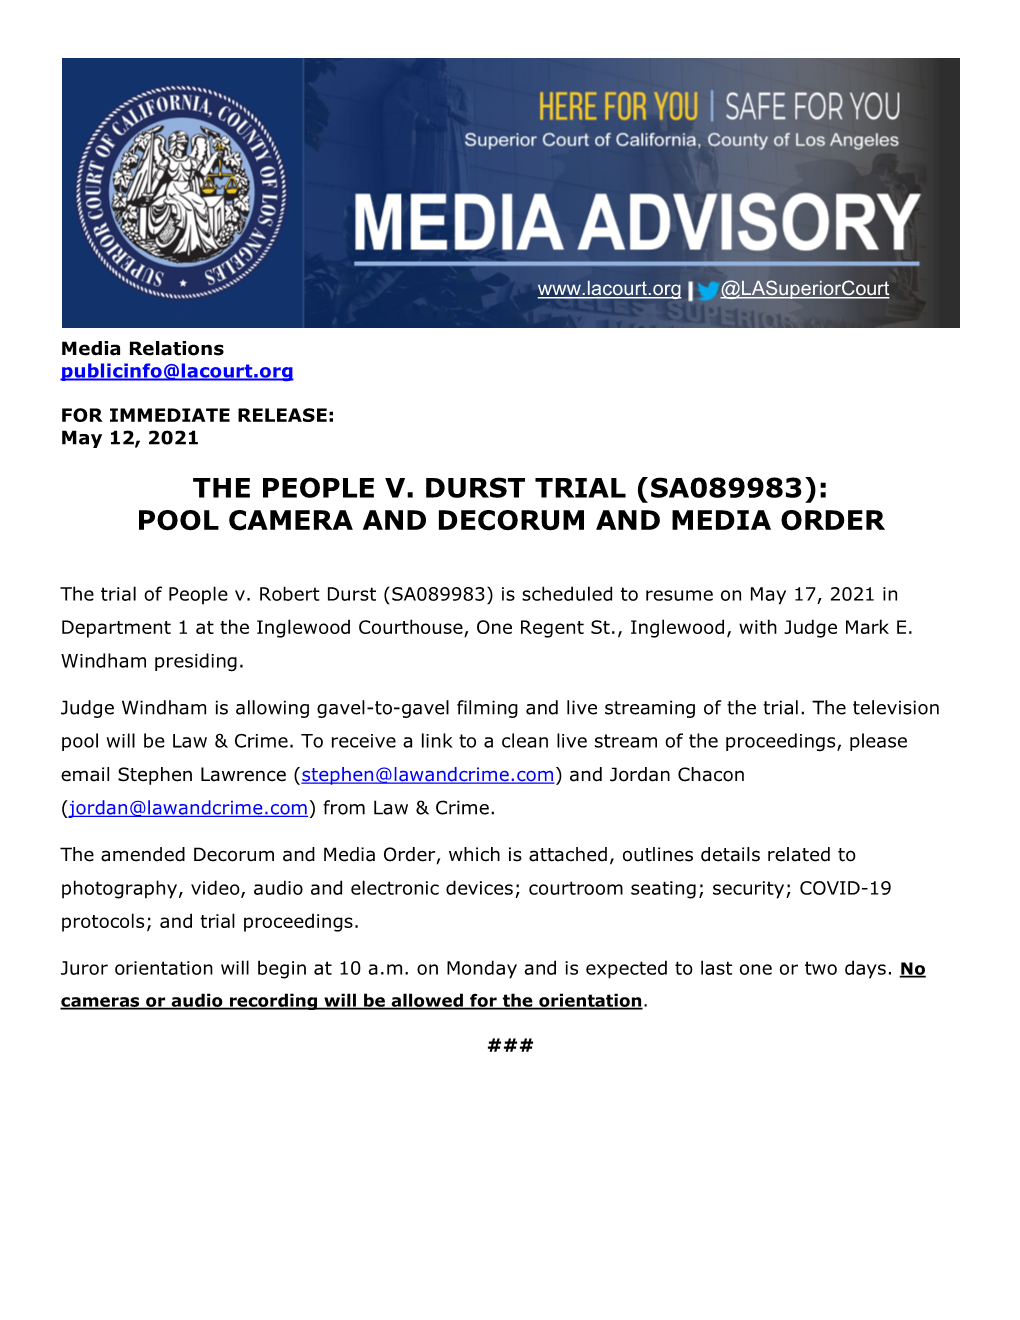 The People V. Durst Trial (Sa089983): Pool Camera and Decorum and Media Order